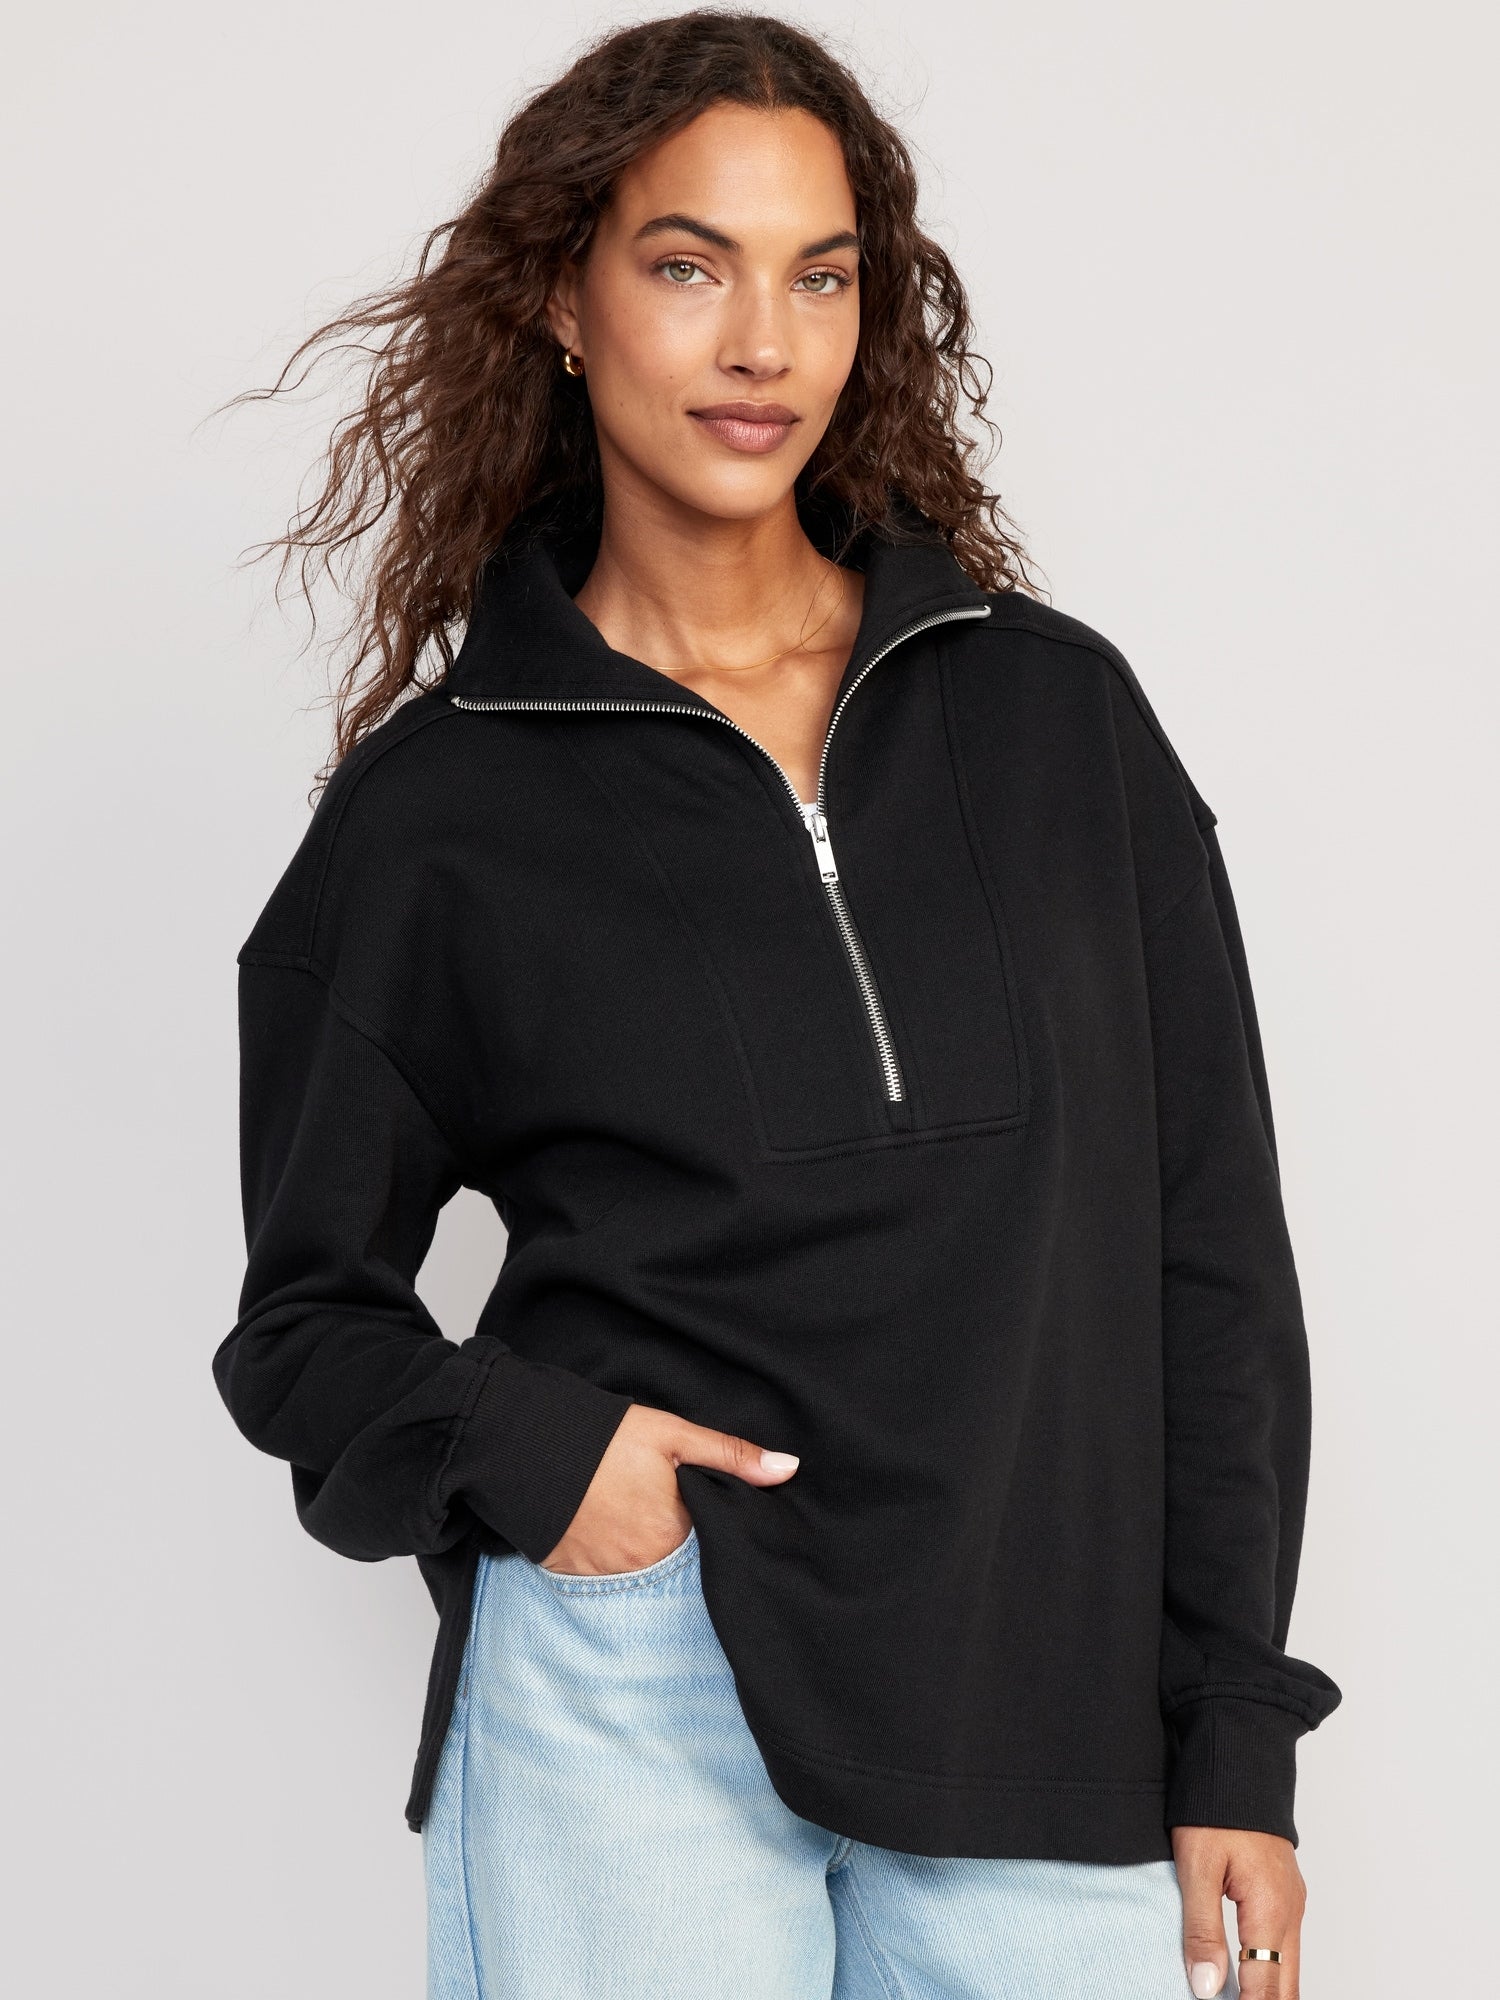 Mujer – tagged Sudaderas – Page 2 – Line Up Shop